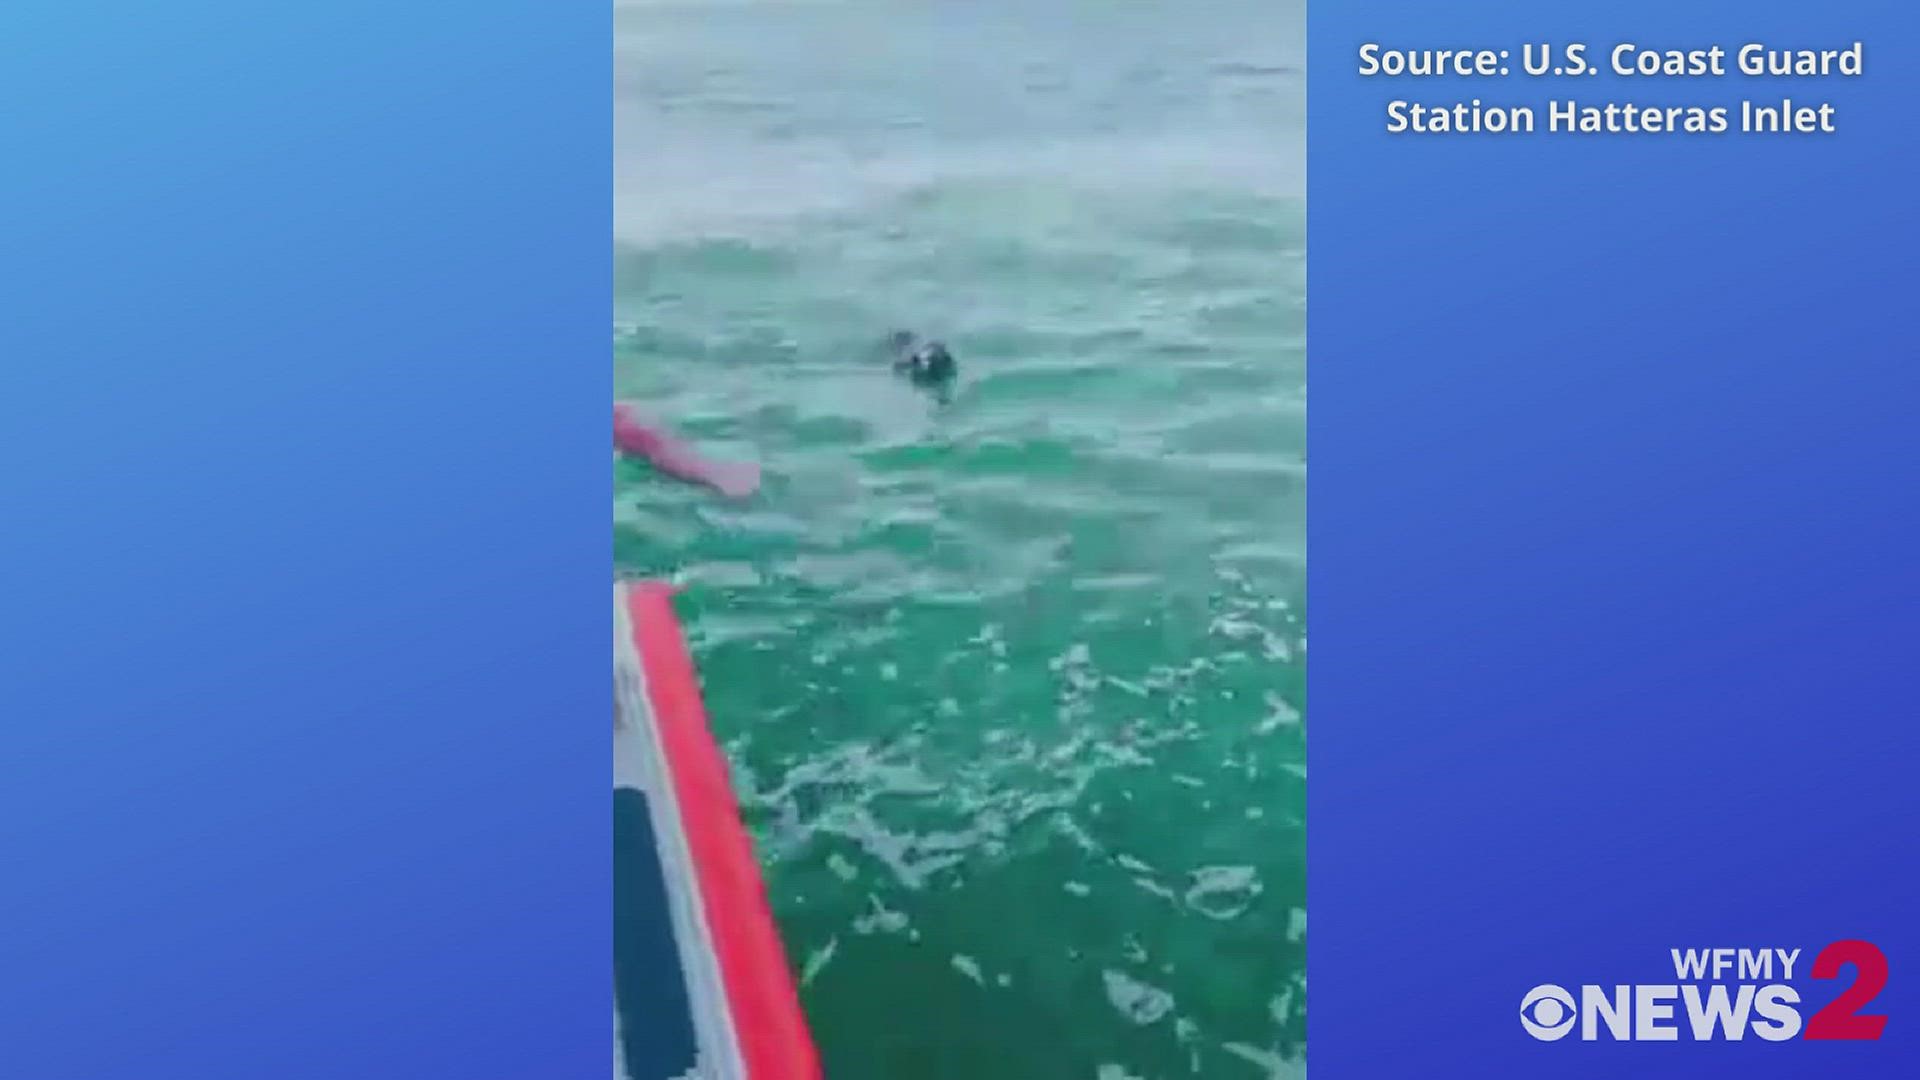 Coast Guard crews patrolling the Pamlico Sound received a call about a dog going overboard from a boat. Soon after, they spotted the dog and rescued her to safety.